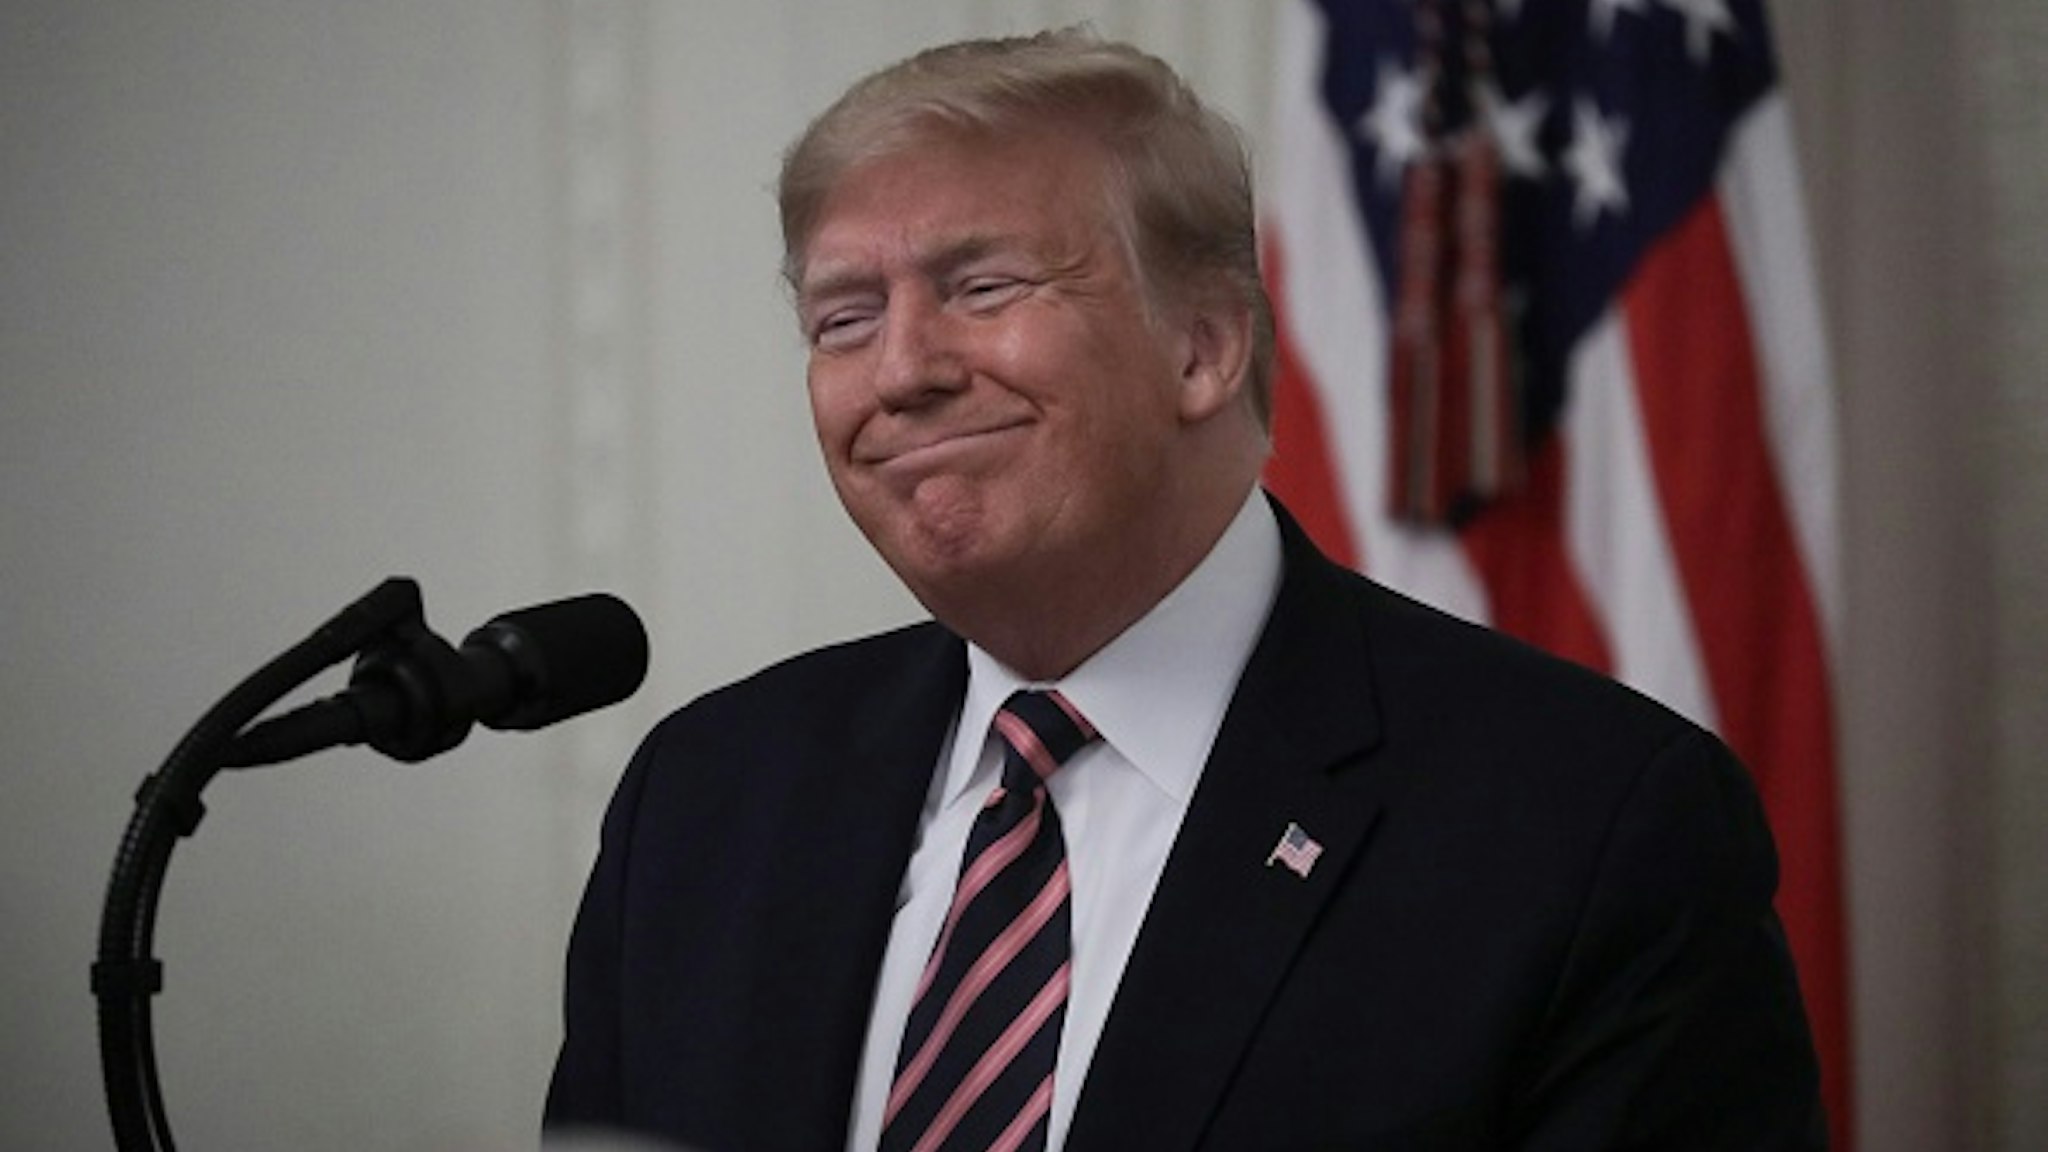 WASHINGTON, DC - FEBRUARY 06: U.S. President Donald Trump speaks at East Room of the White House a day after his Senate impeachment trial acquittal in Washington, United States on February 6, 2020.